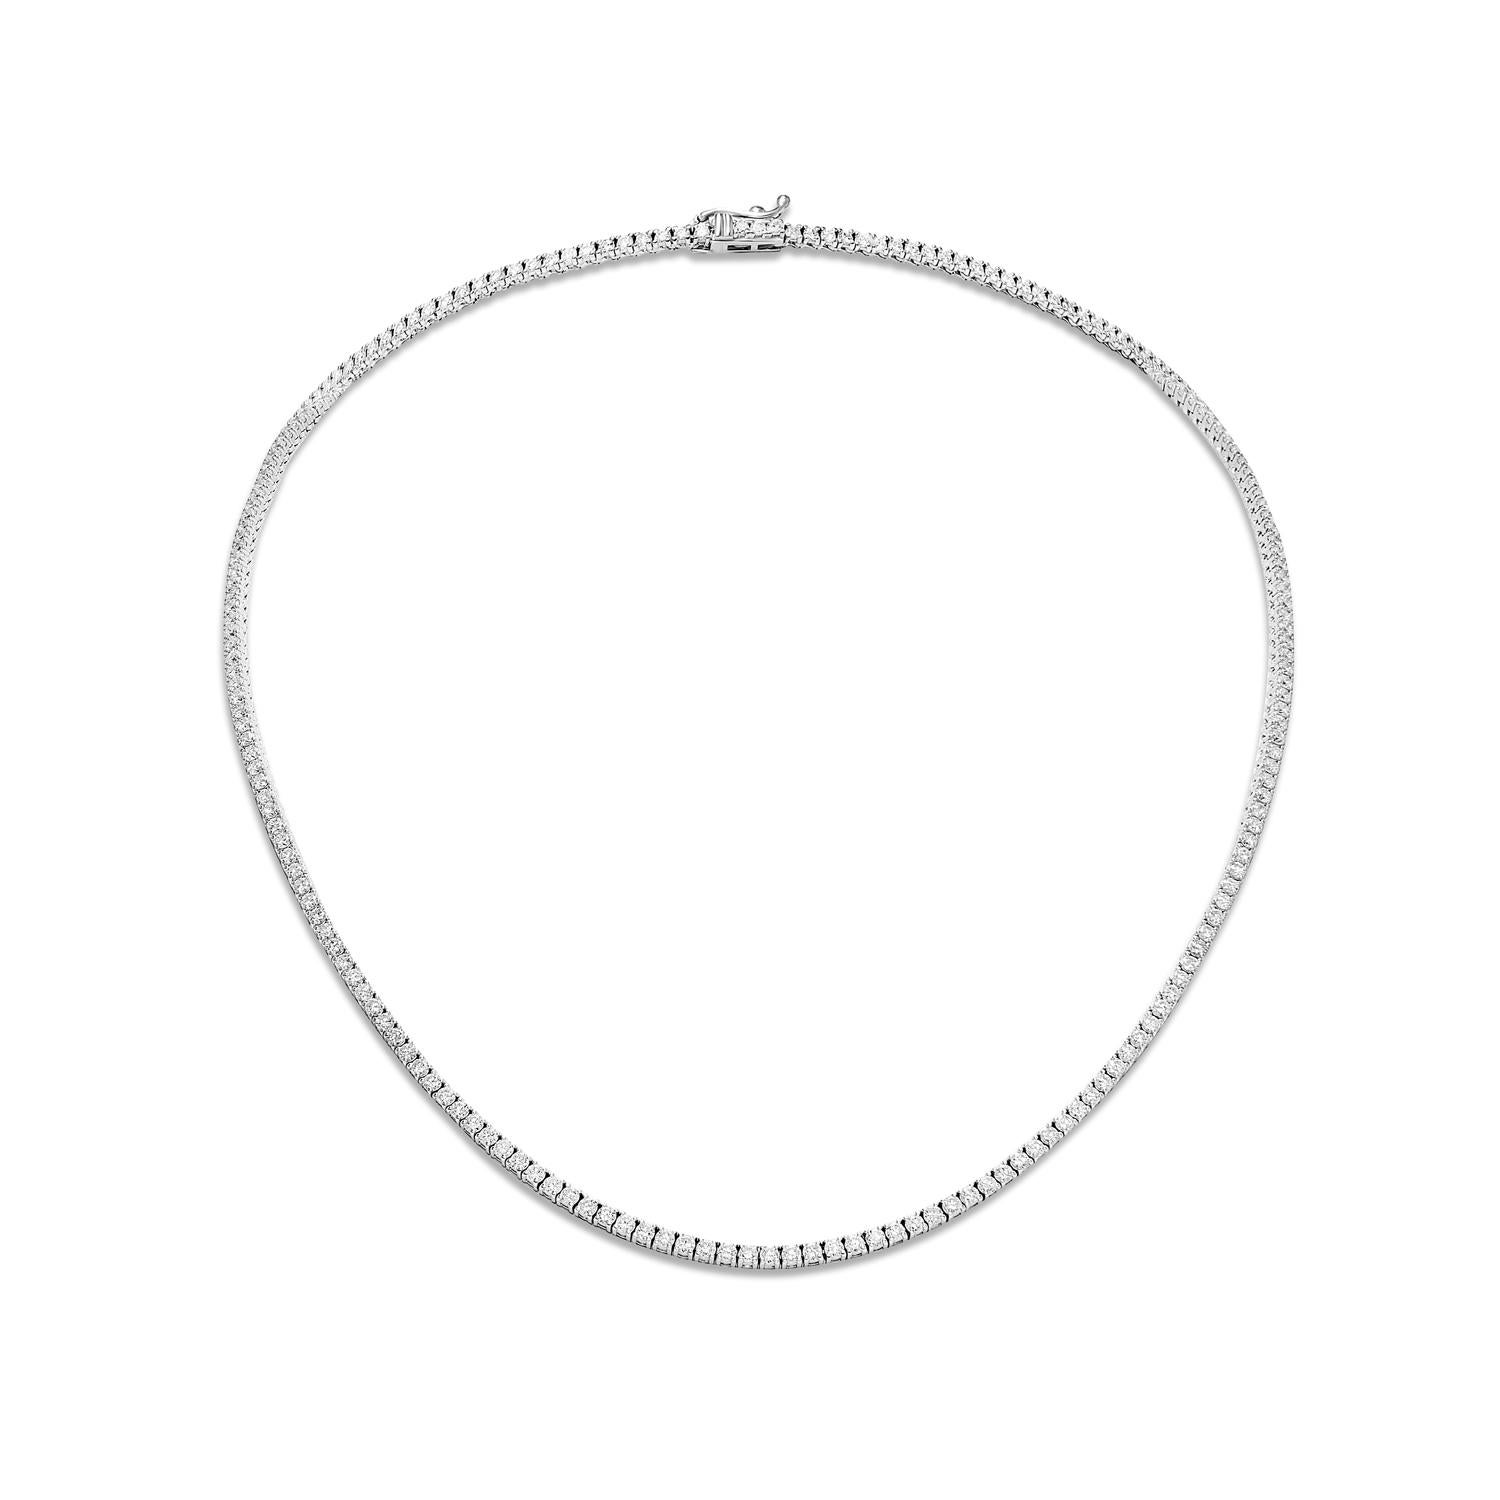 Made with lustrous round brilliant cut diamonds set in 14 karat white gold, this necklace offers unmatched beauty and glamour. Whether you're looking to add a touch of sophistication to your formal outfit or simply want to add some sparkle to your